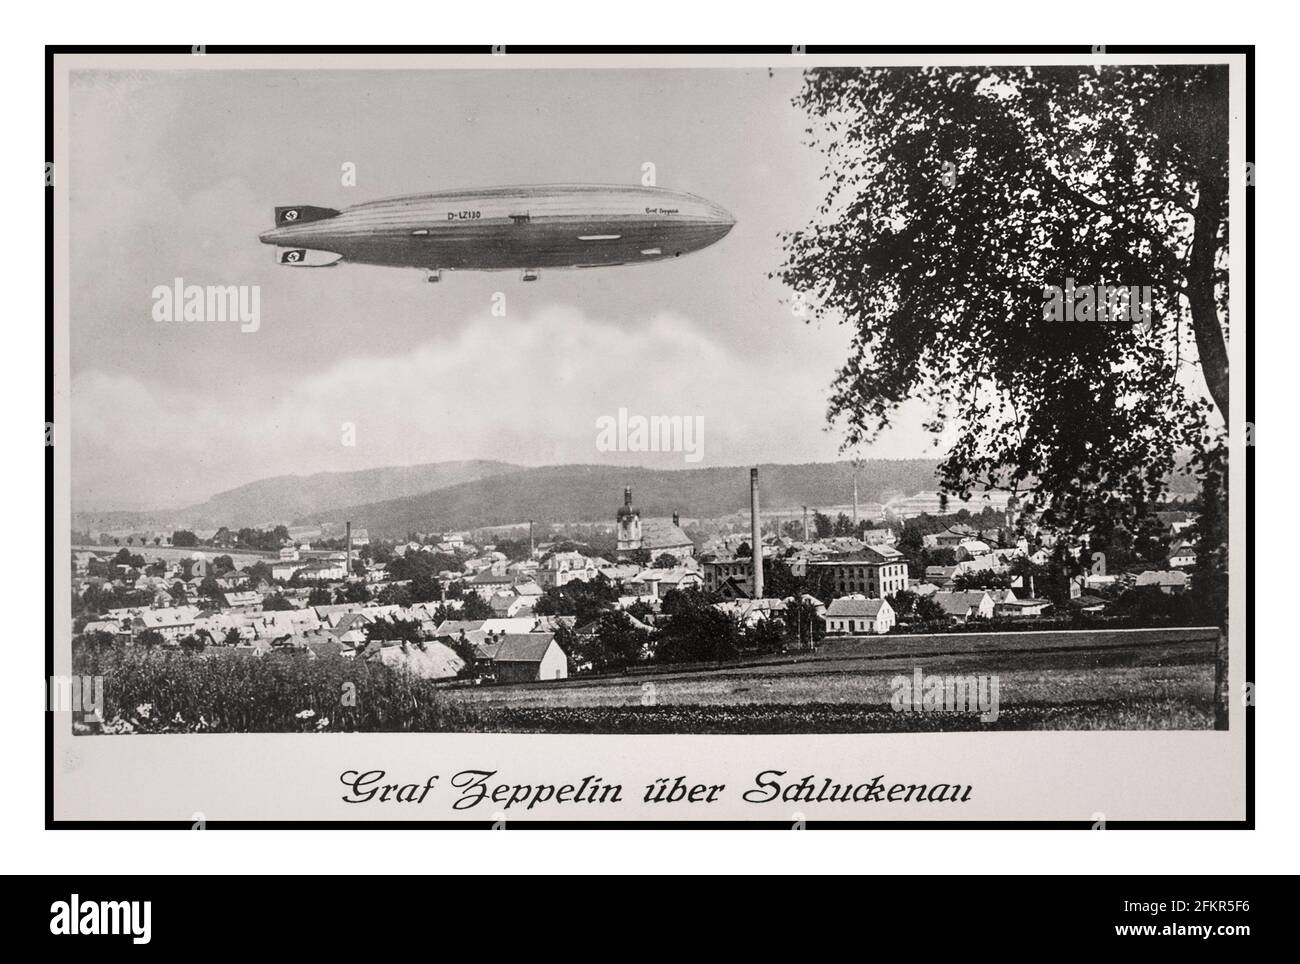 Vintage 1930's Graf Zeppelin Air Ship Balloon with Swastika tail fin over a small town in Germany Schluckenau. 'GRAF ZEPPELIN UBER SCHLUCKENAU' Stock Photo